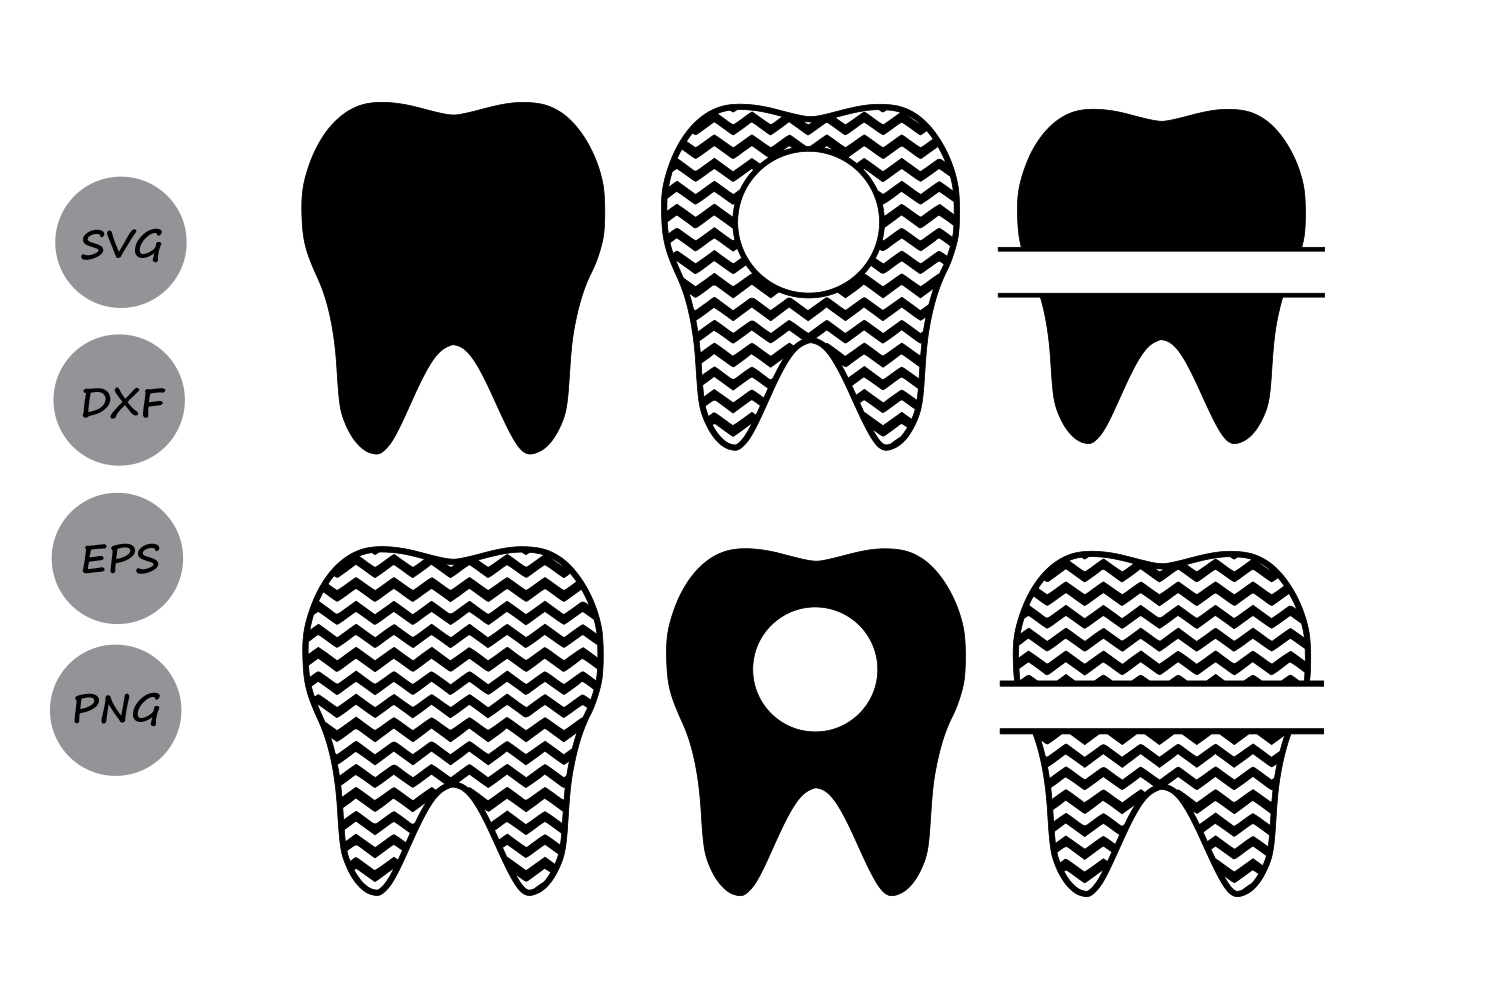 Download Tooth SVG, Tooth Monogram SVG, Teeth SVG, Dentist Tooth Svg Cut Files, Dentist Cutting File ...